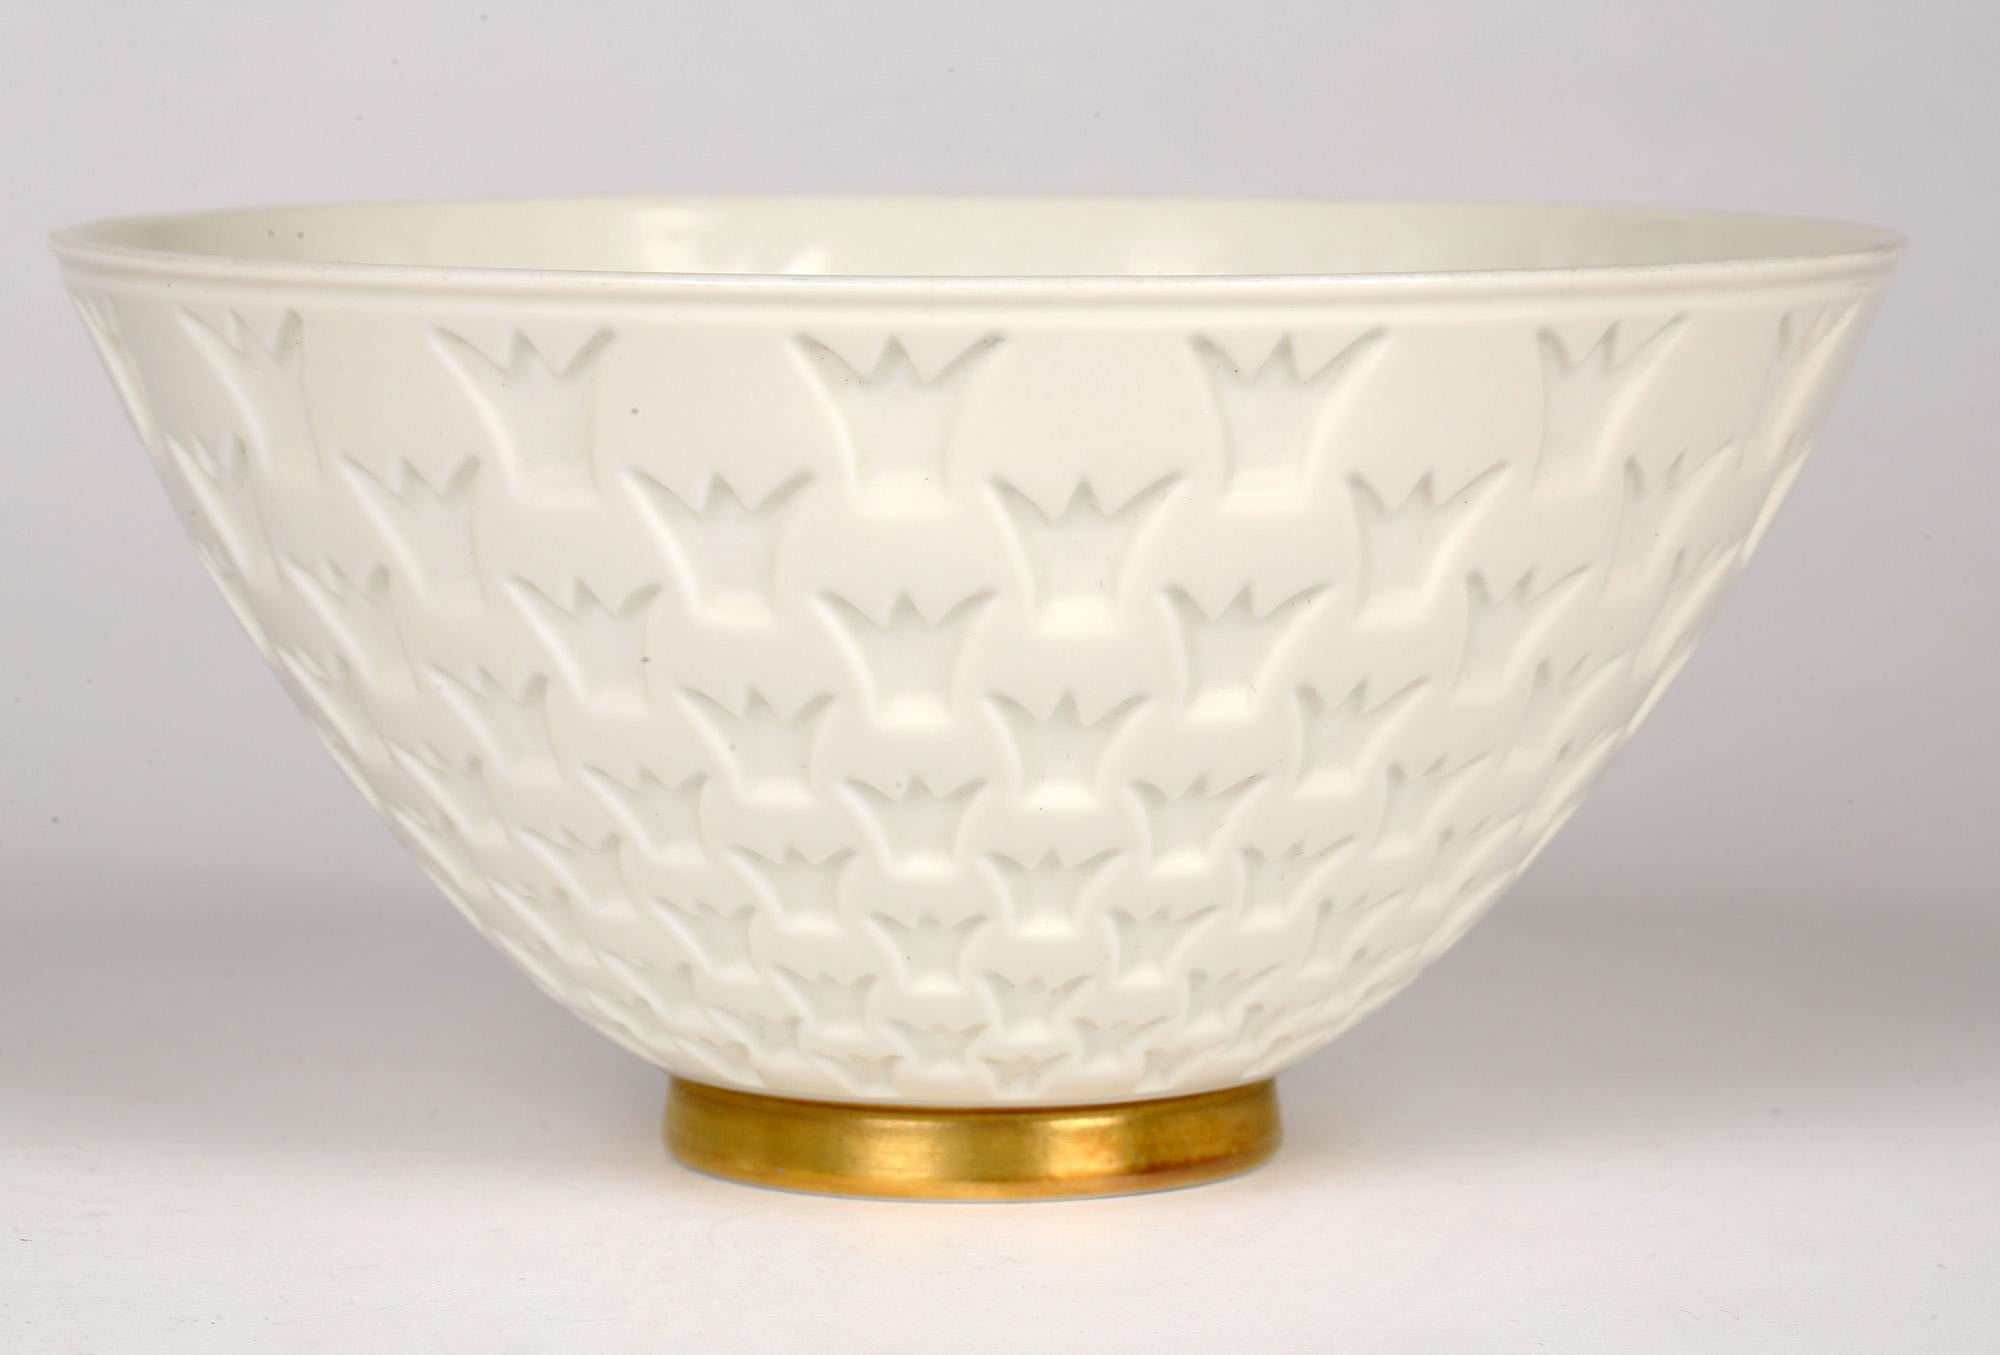 A very stylish and finely made Swedish Rörstrand porcelain bowl the body decorated with a crown window design by Gunnar Nylund (1904-97) and dating from around 1940. The lightly made bowl stands on a narrow rounded foot run with a gilded edge with a